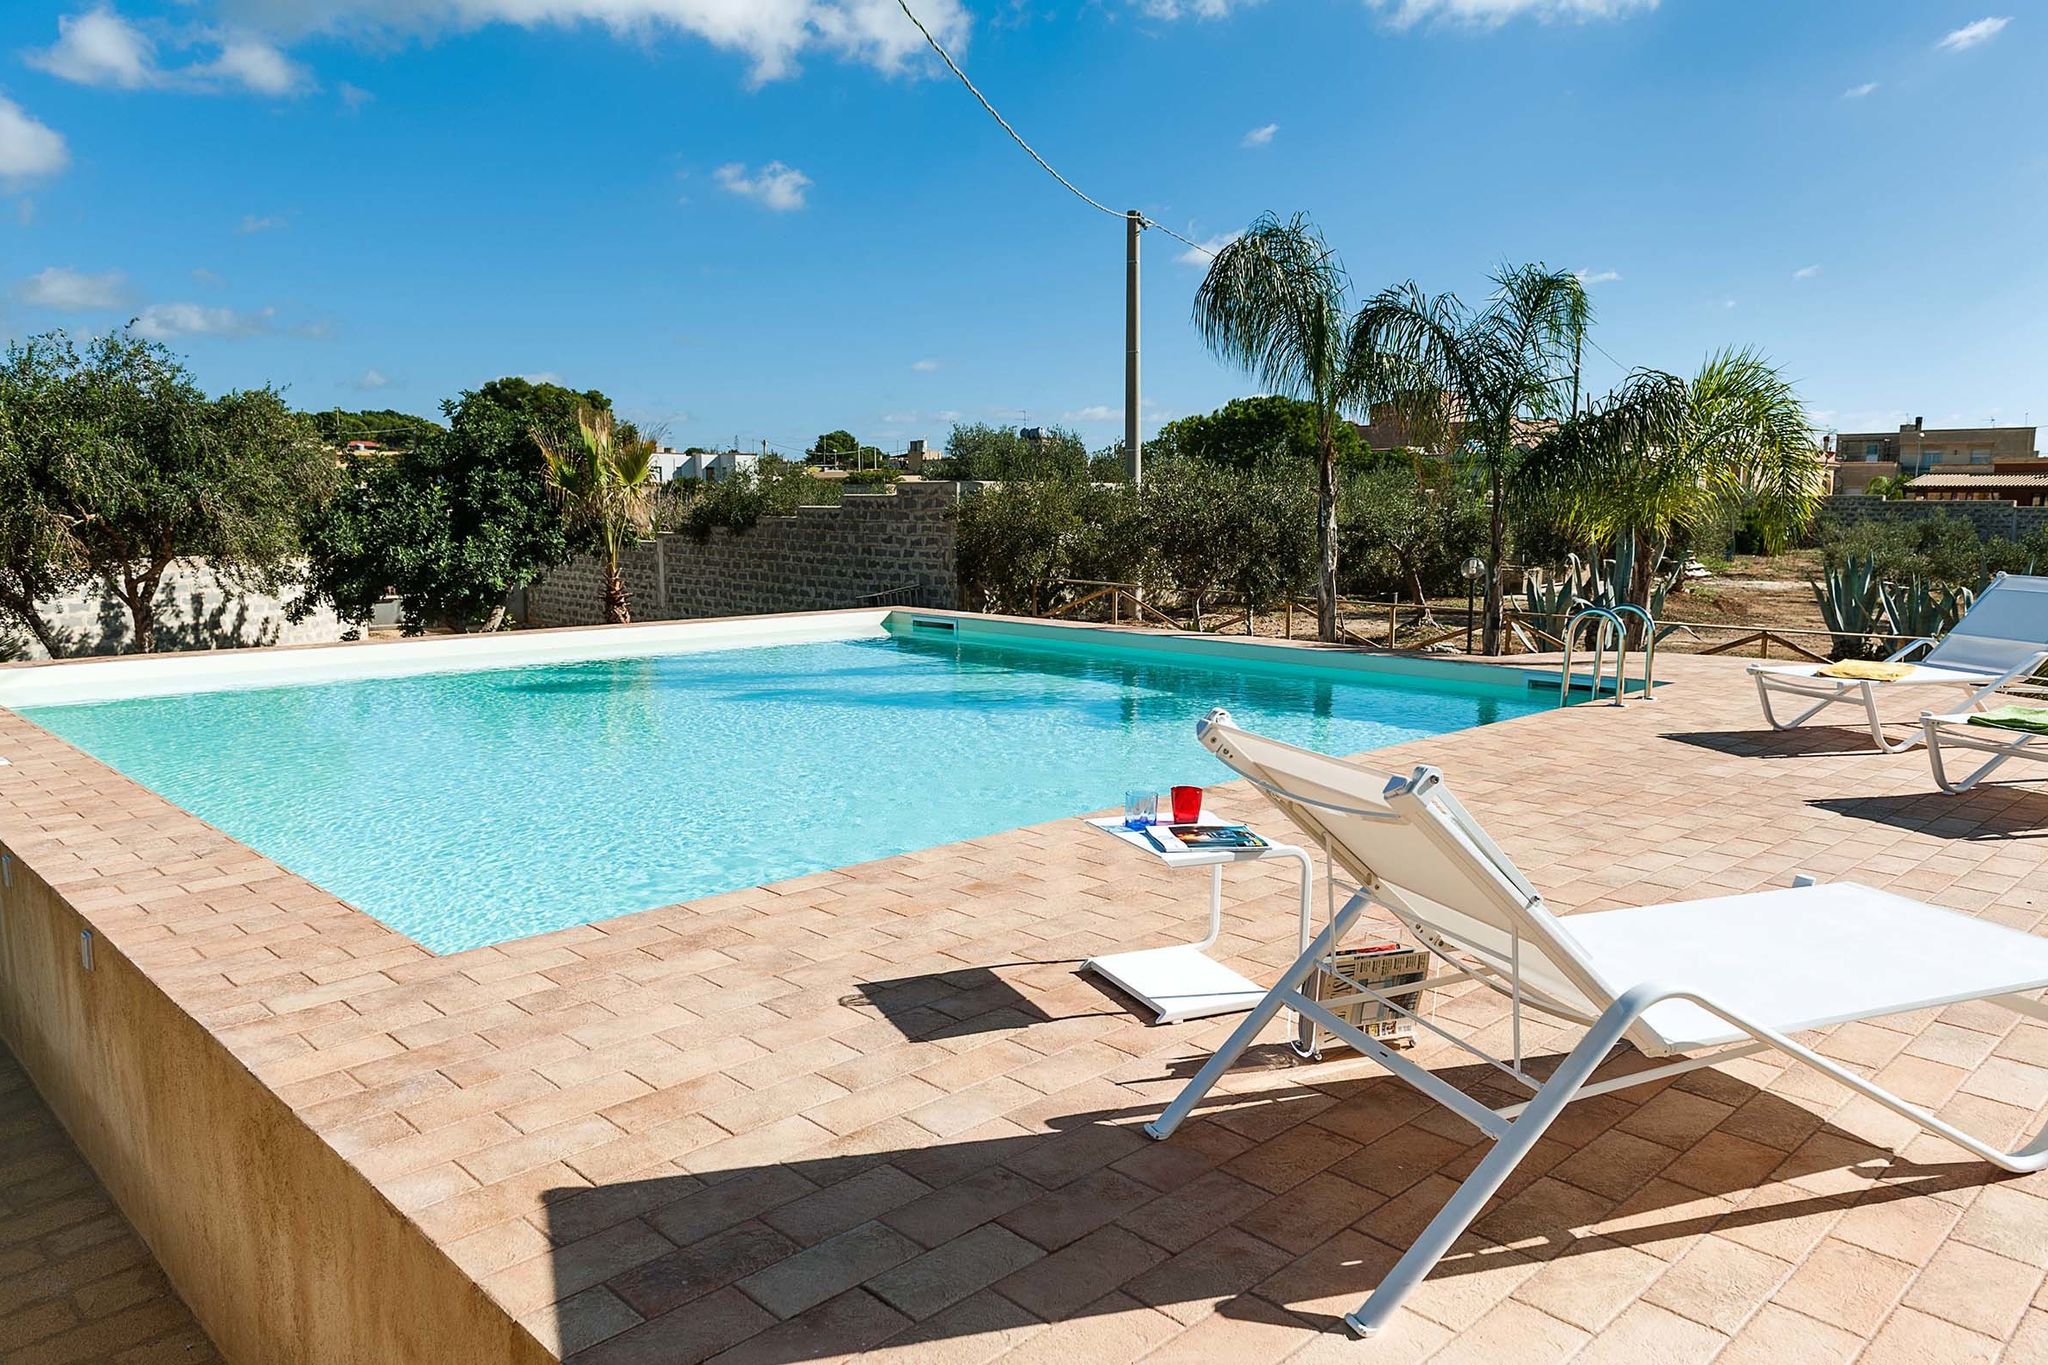 Wonderful villa with swimming pool nearby Marsala, just 5km from the sea!